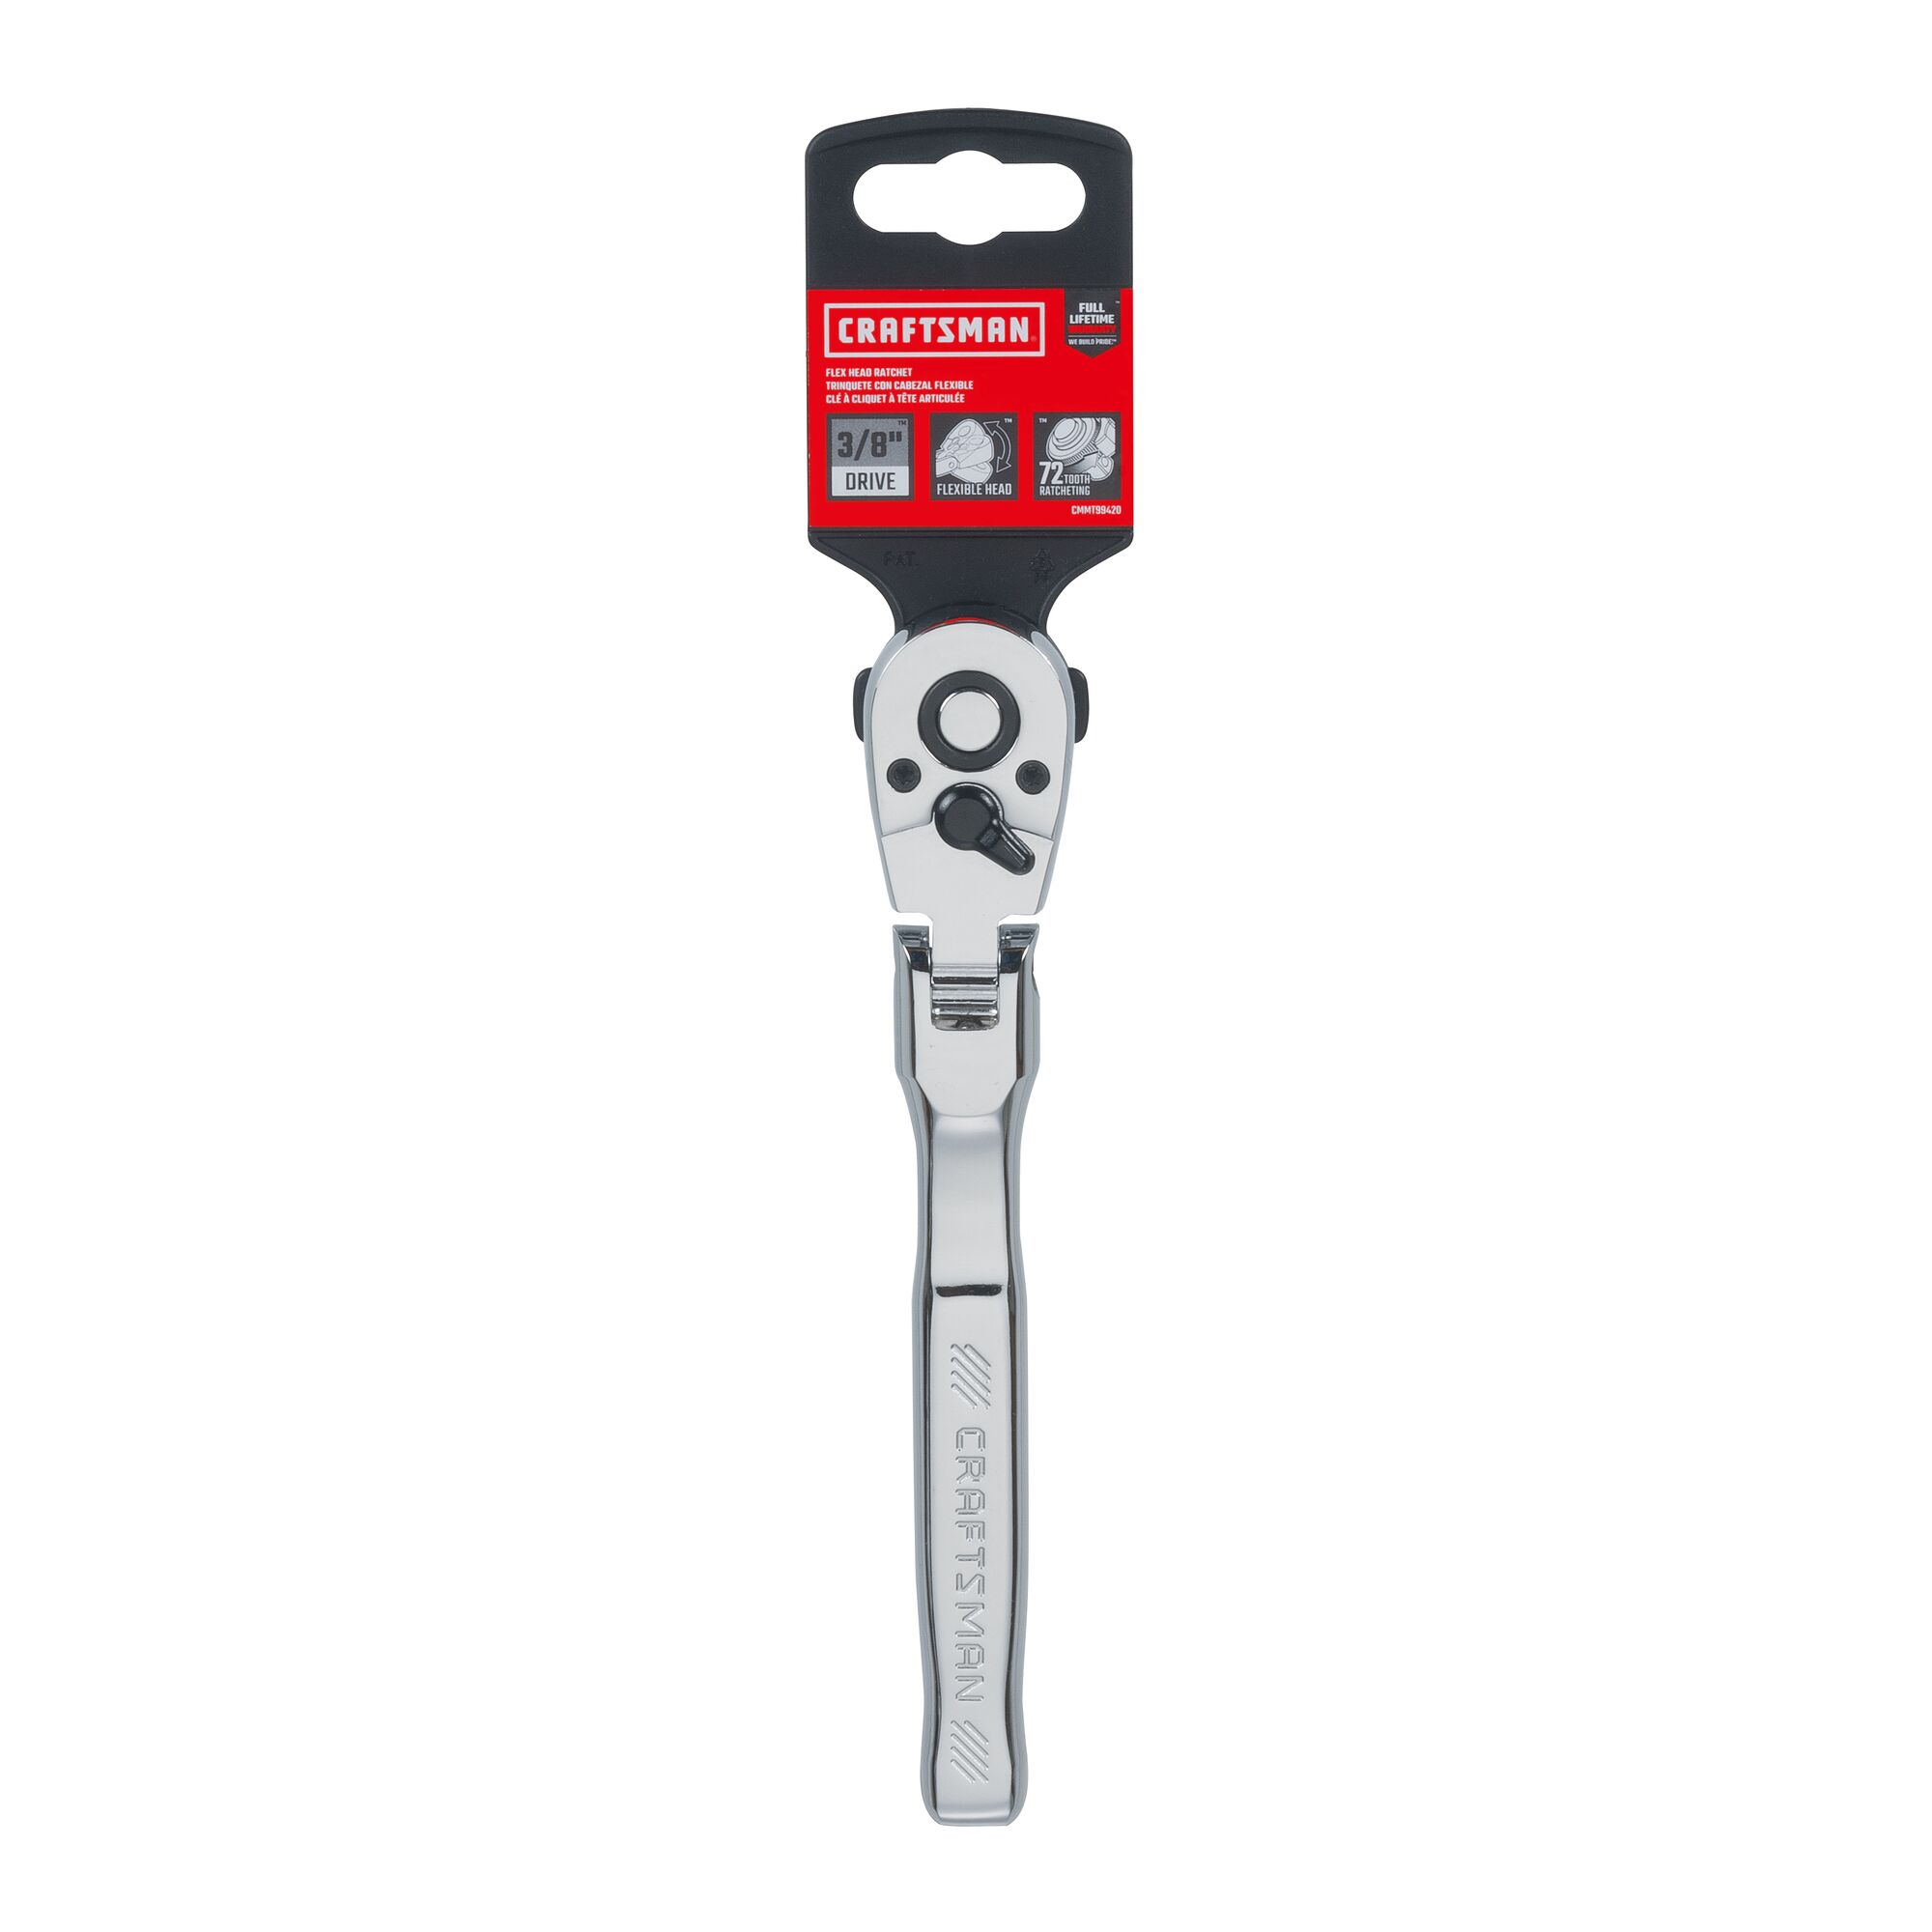 72 tooth 3 eighth inch drive quick release flexible head standard ratchet with packaging tag.